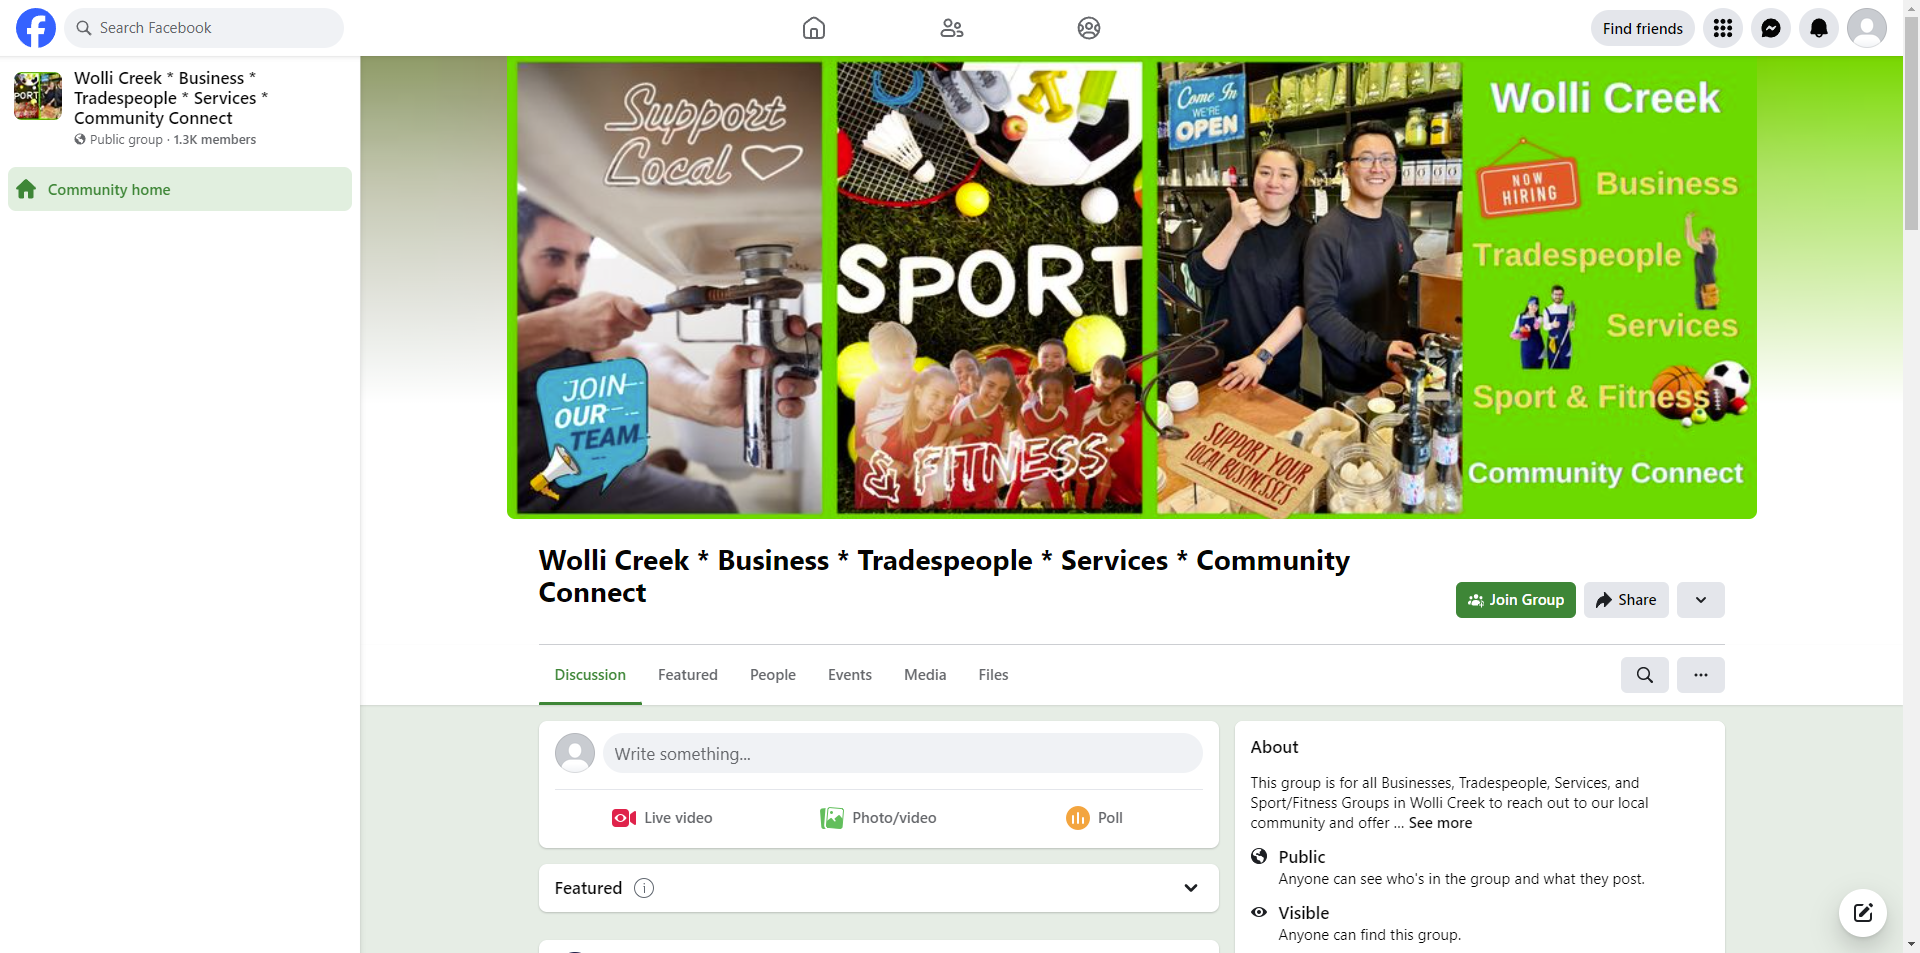 Wolli Creek * Business * Tradespeople * Services * Community Connect